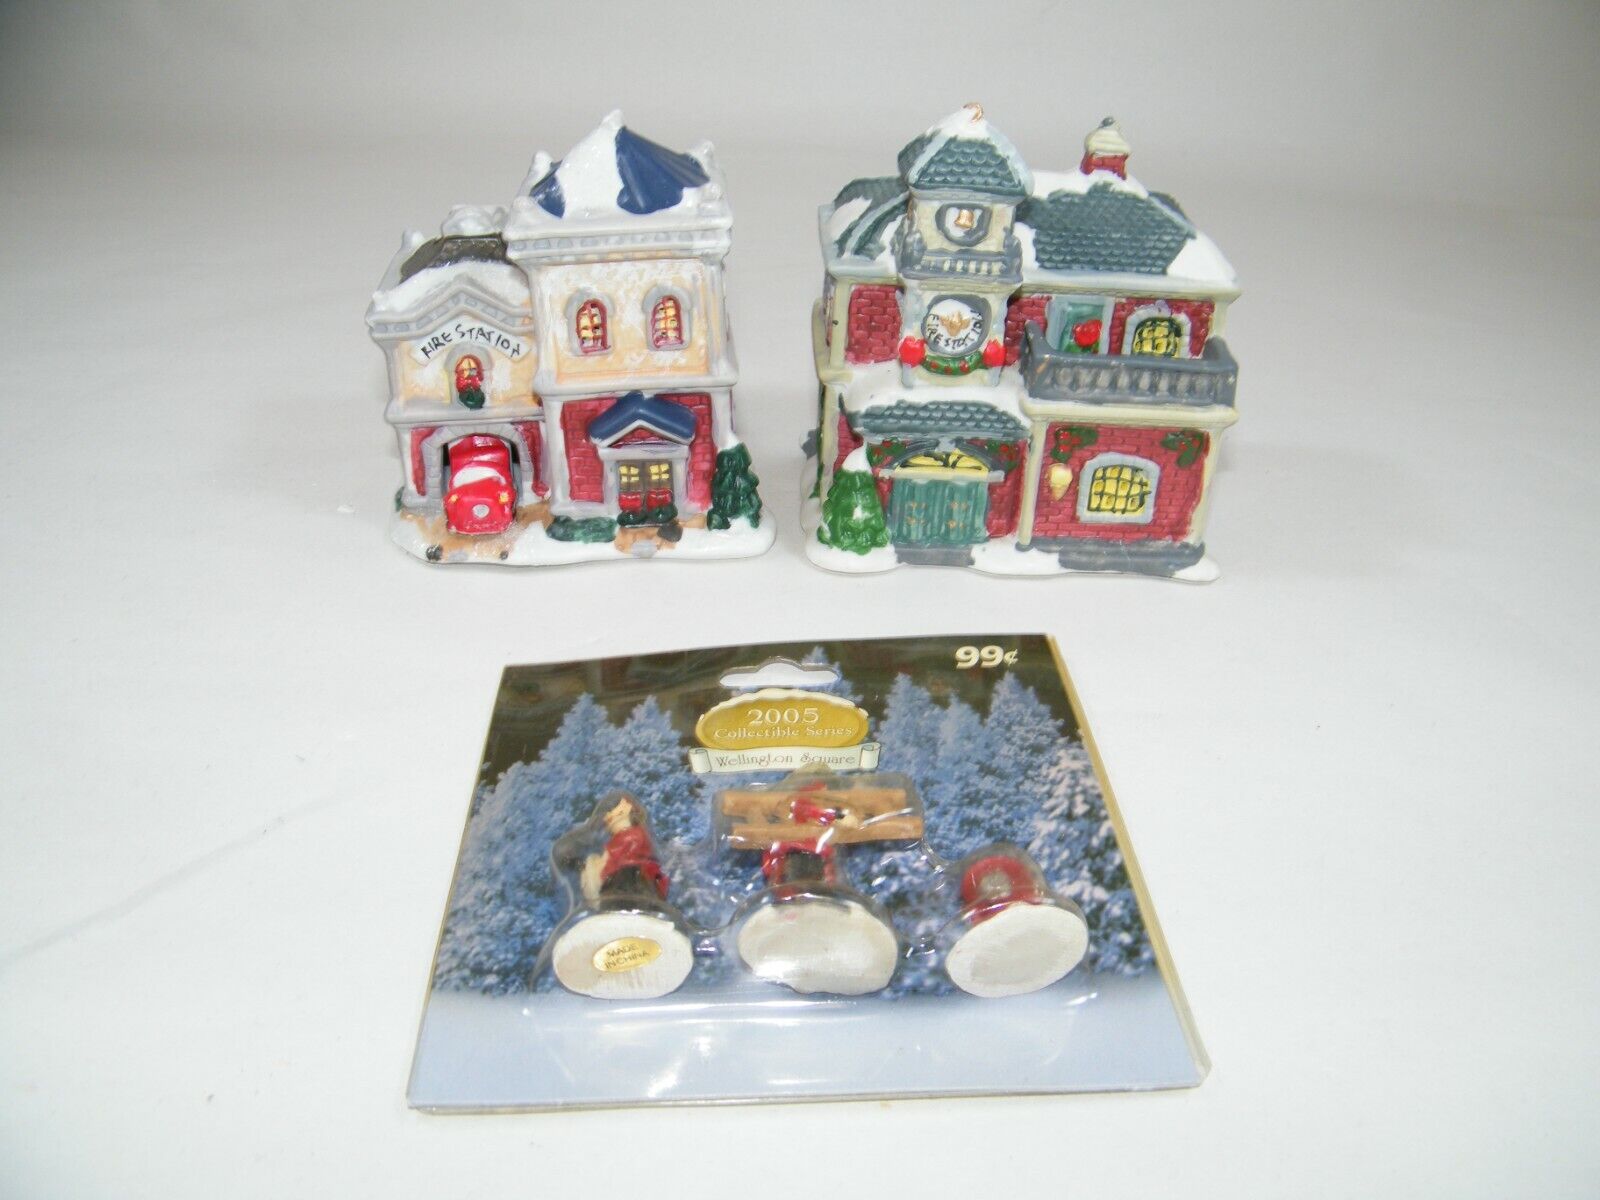 2004 / 2005 WELLINGTON SQUARE COLLECTION FIRE STATIONS & FIGURES